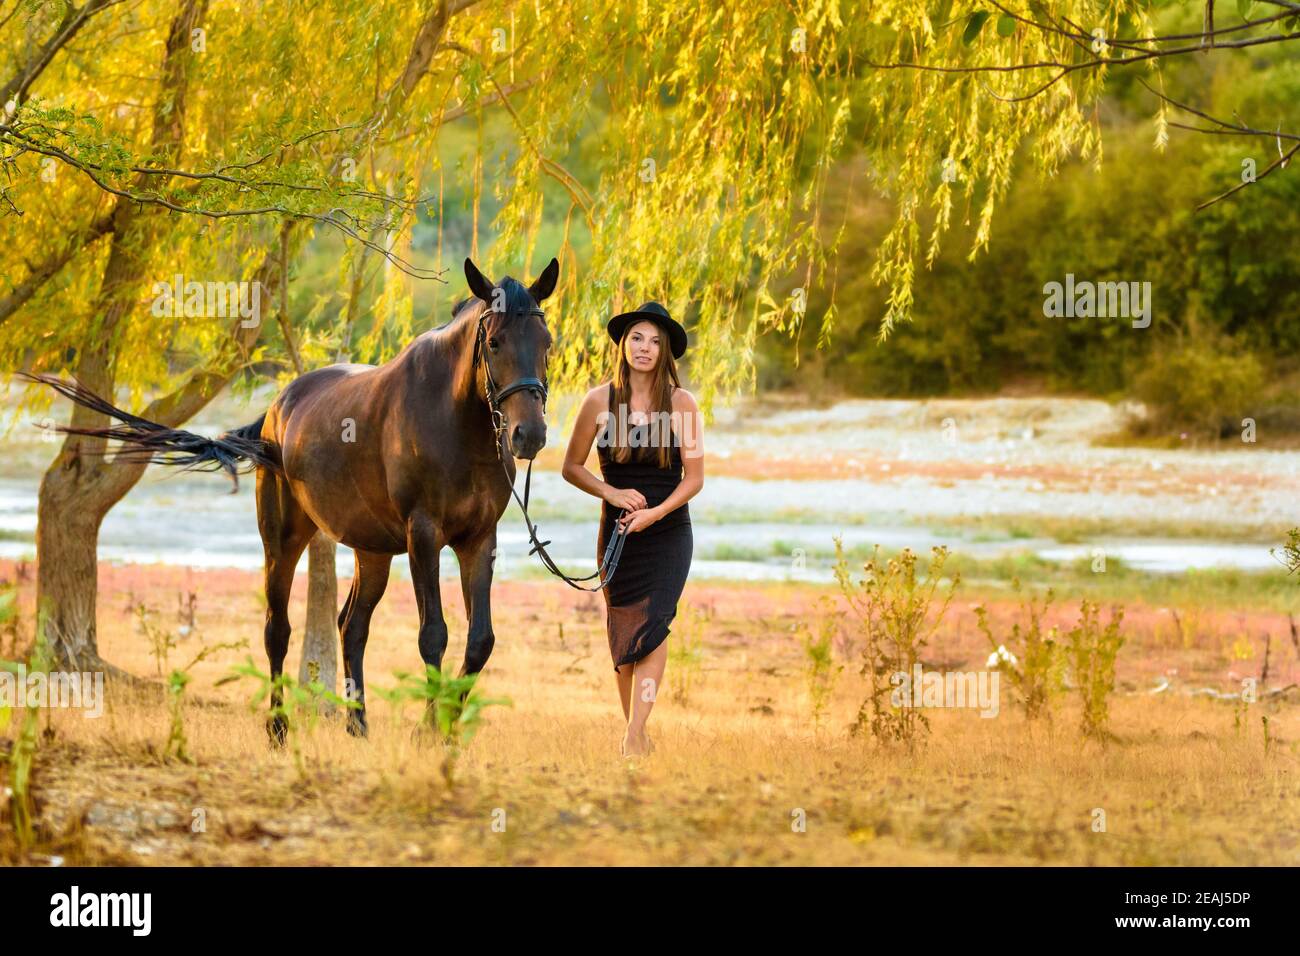 A girl in a beautiful black dress and a black hat walks with a horse across the field Stock Photo